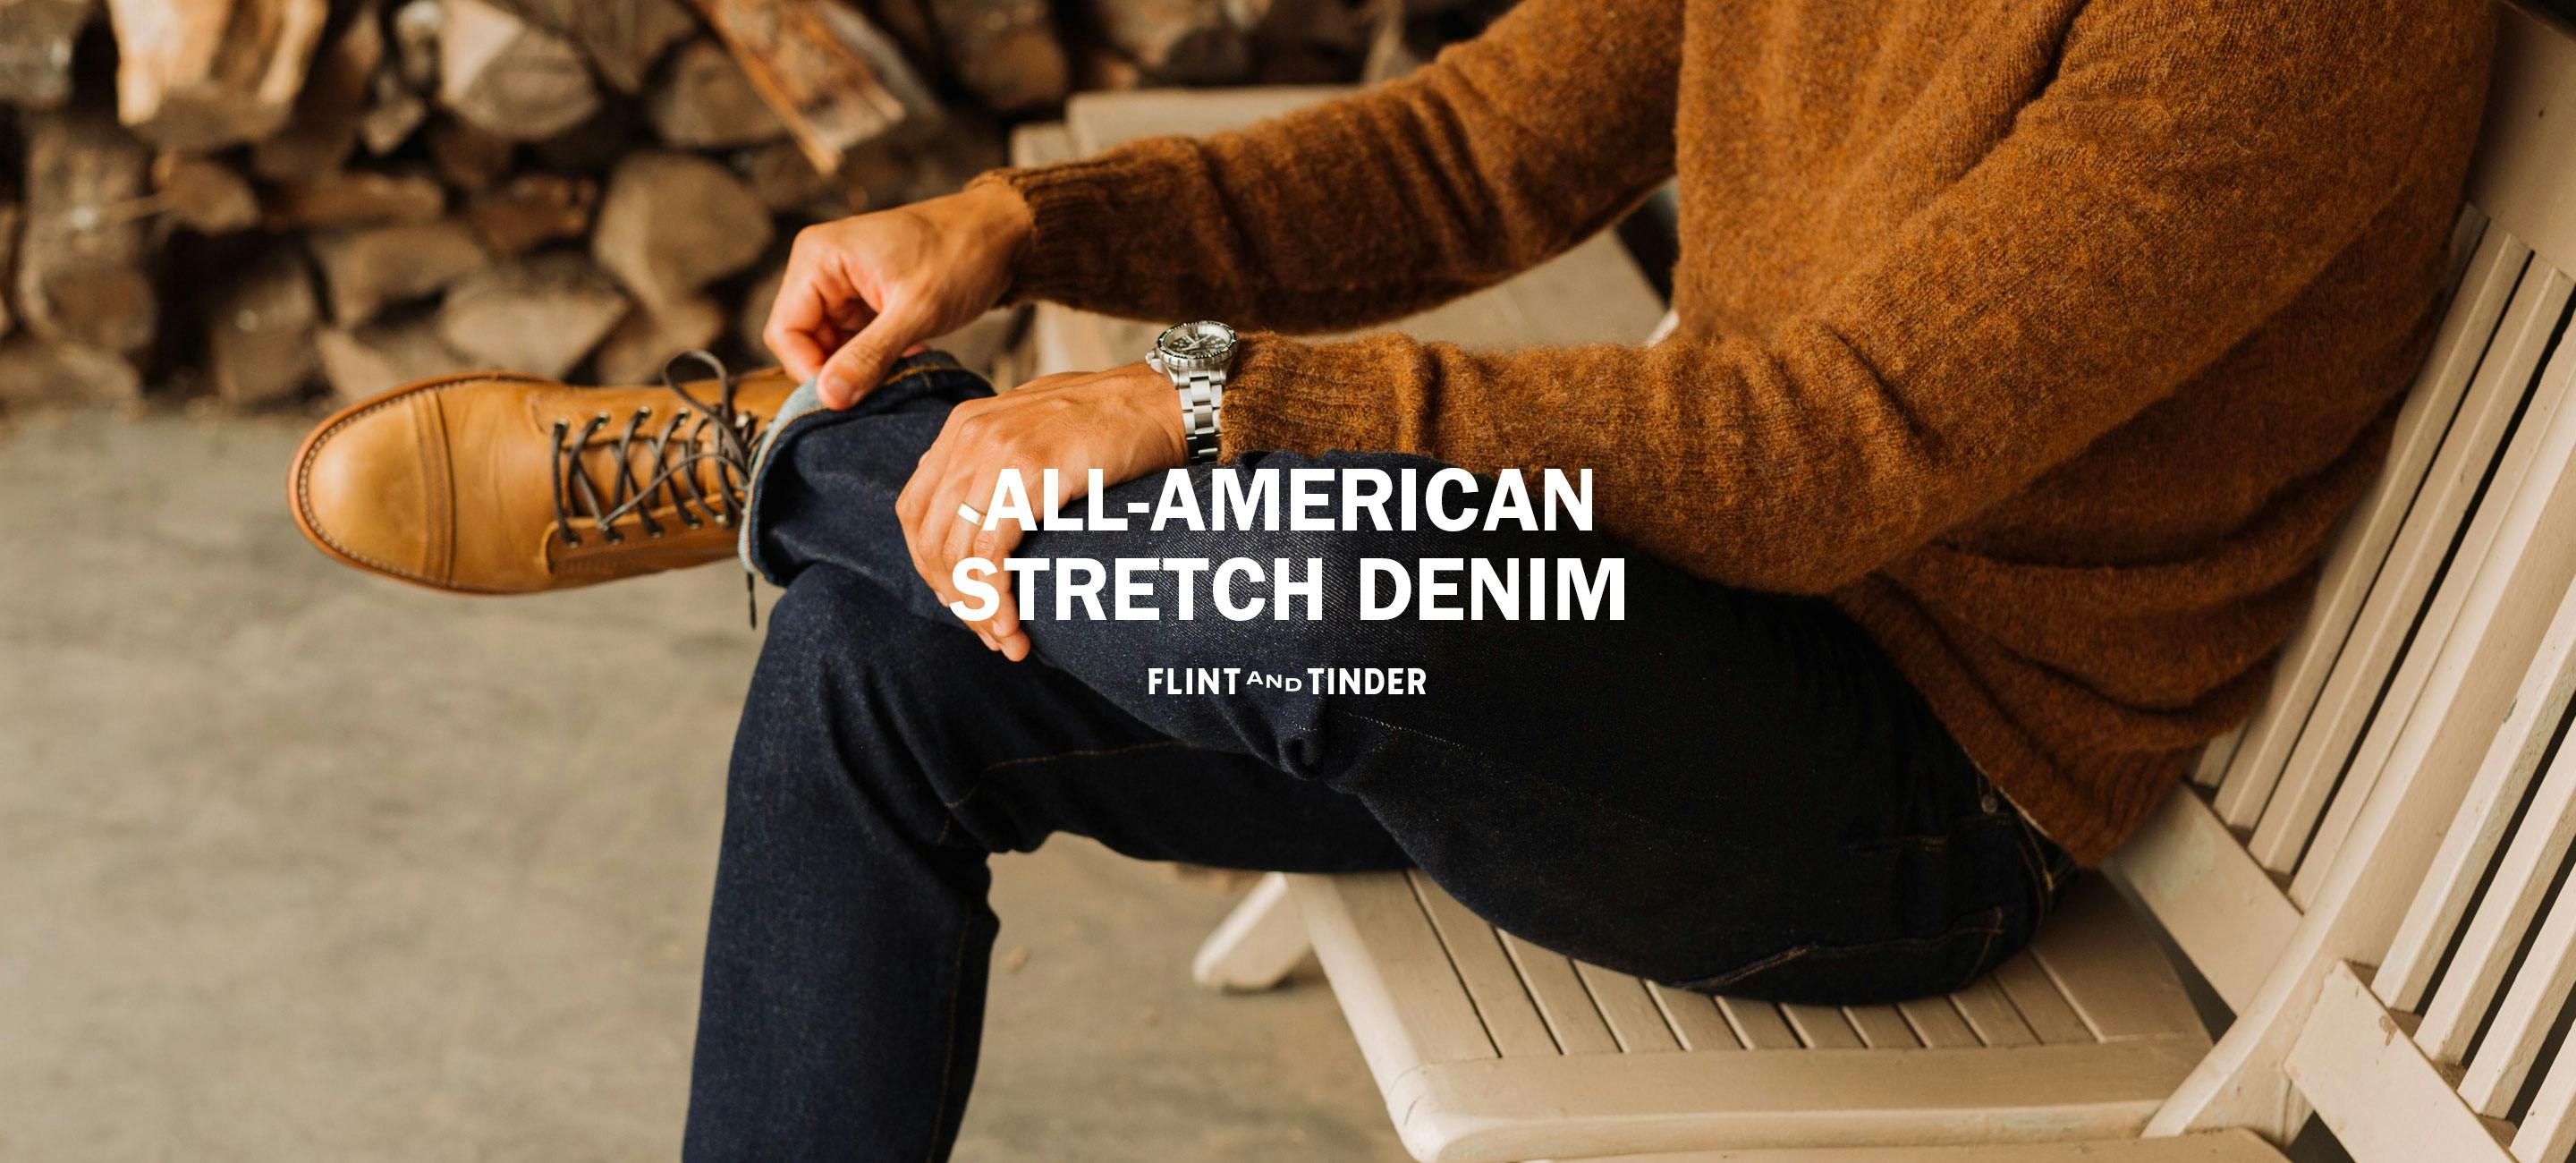 Flint and Tinder: All-American Jeans